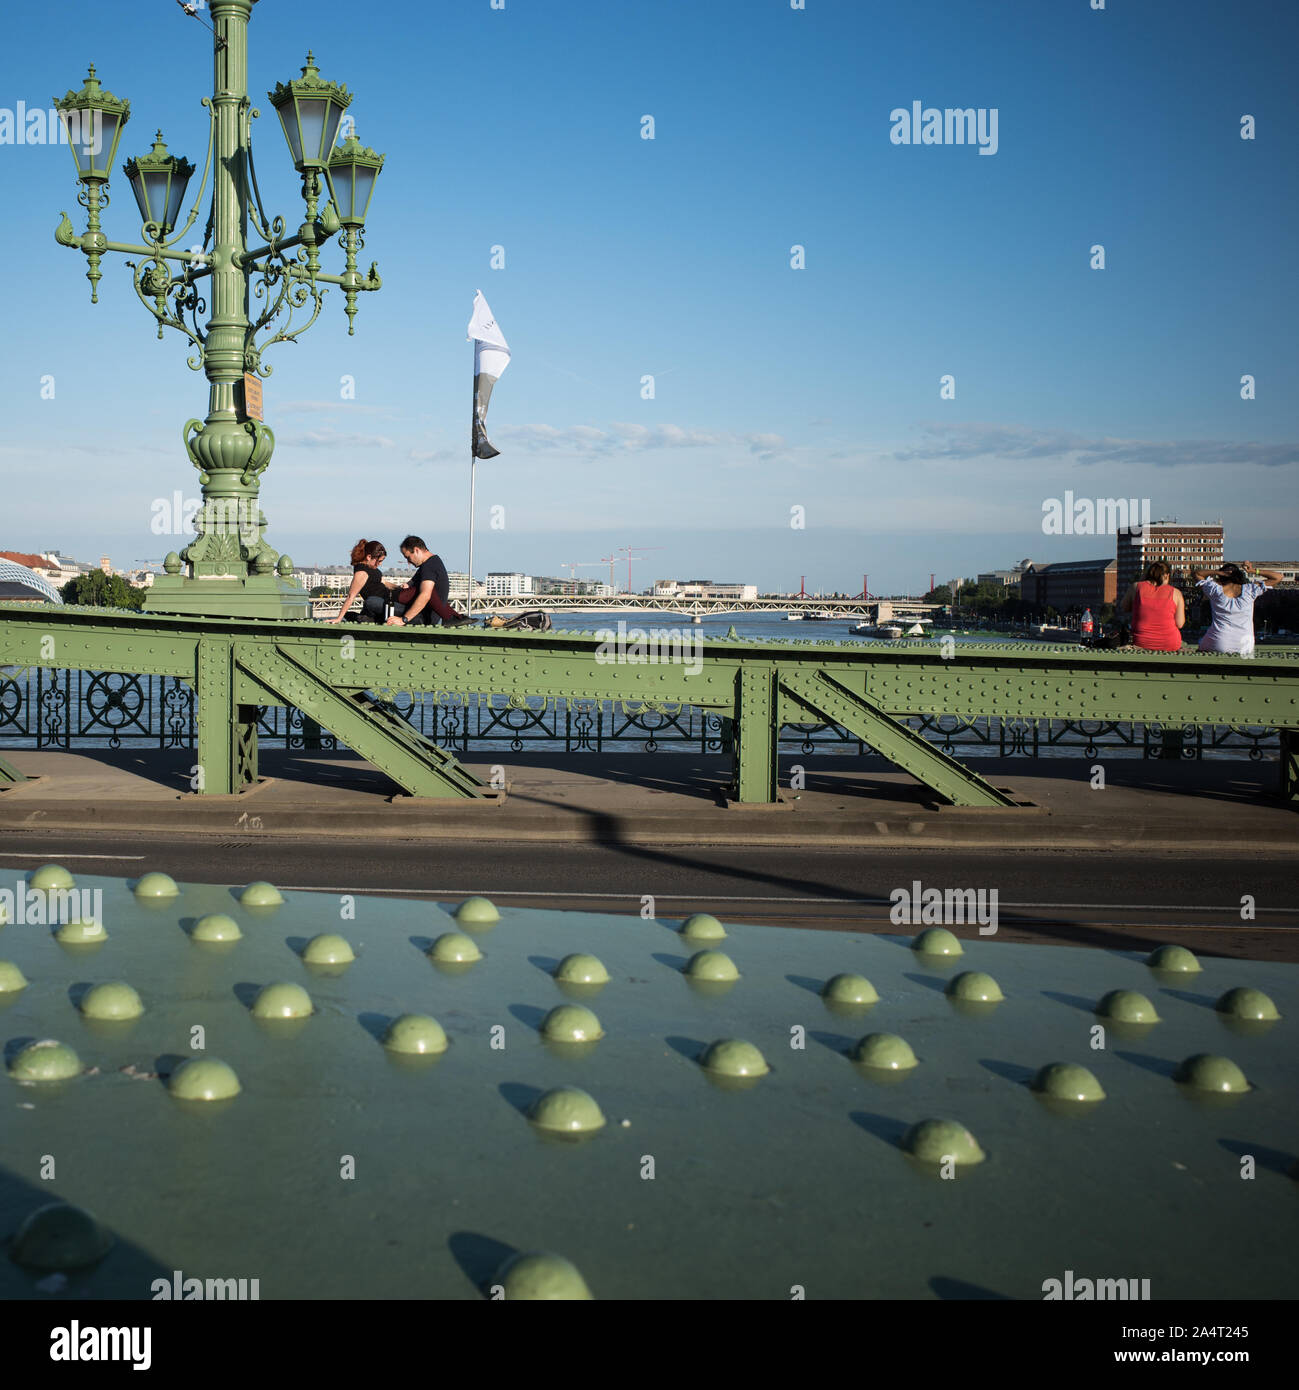 SZABADSAG HID BRIDGE BUDAPEST - 1894-1896 DESIGNED BY ARCHITECT JANOS FEKETEHAZY - LOVERS SEATING ON THE IRON BRIDGE STRUCTURE DURING A SUNNY DAY - BUDAPEST CITY - BUDAPEST BRIDGE - BUDAPEST STREET PHOTOGRAPHY - HUNGARY © Frédéric BEAUMONT Stock Photo